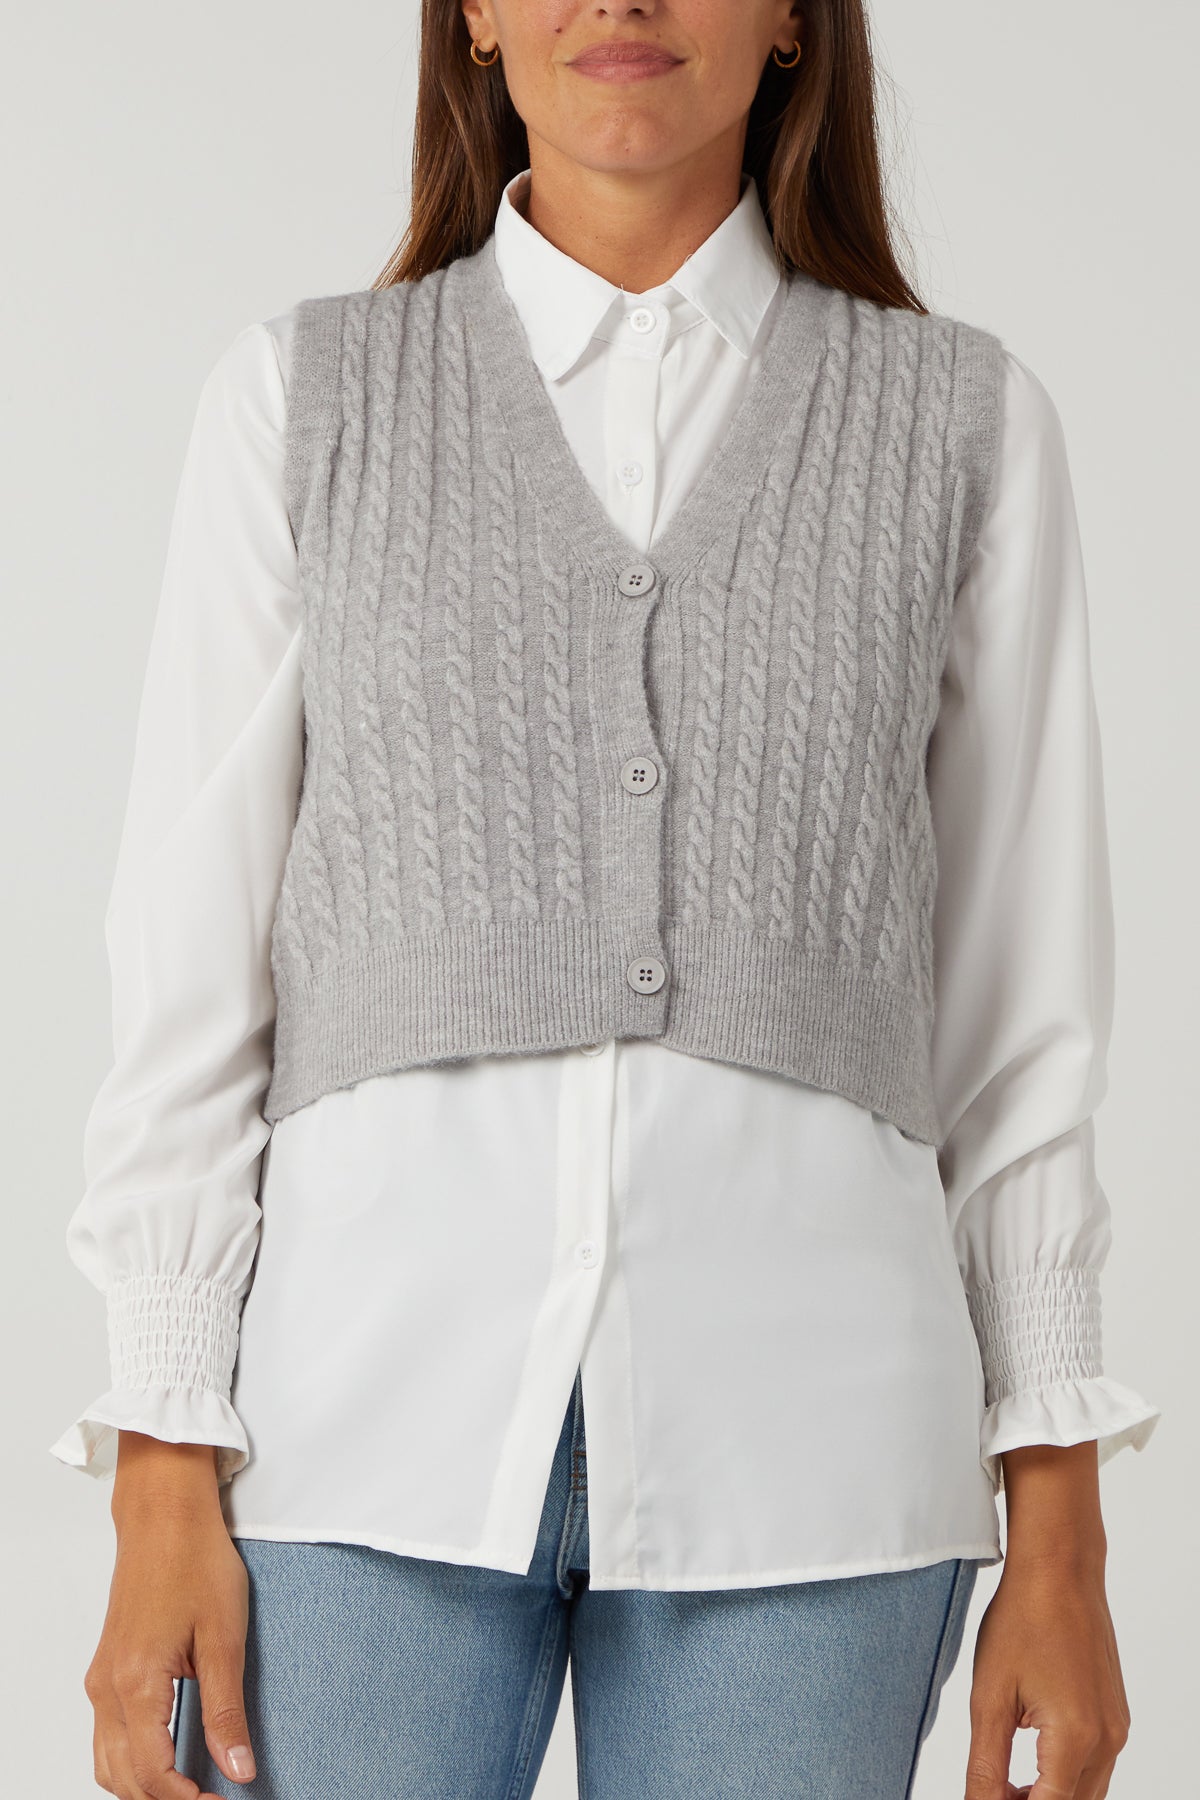 Cable Knit Buttoned Vest With Undershirt